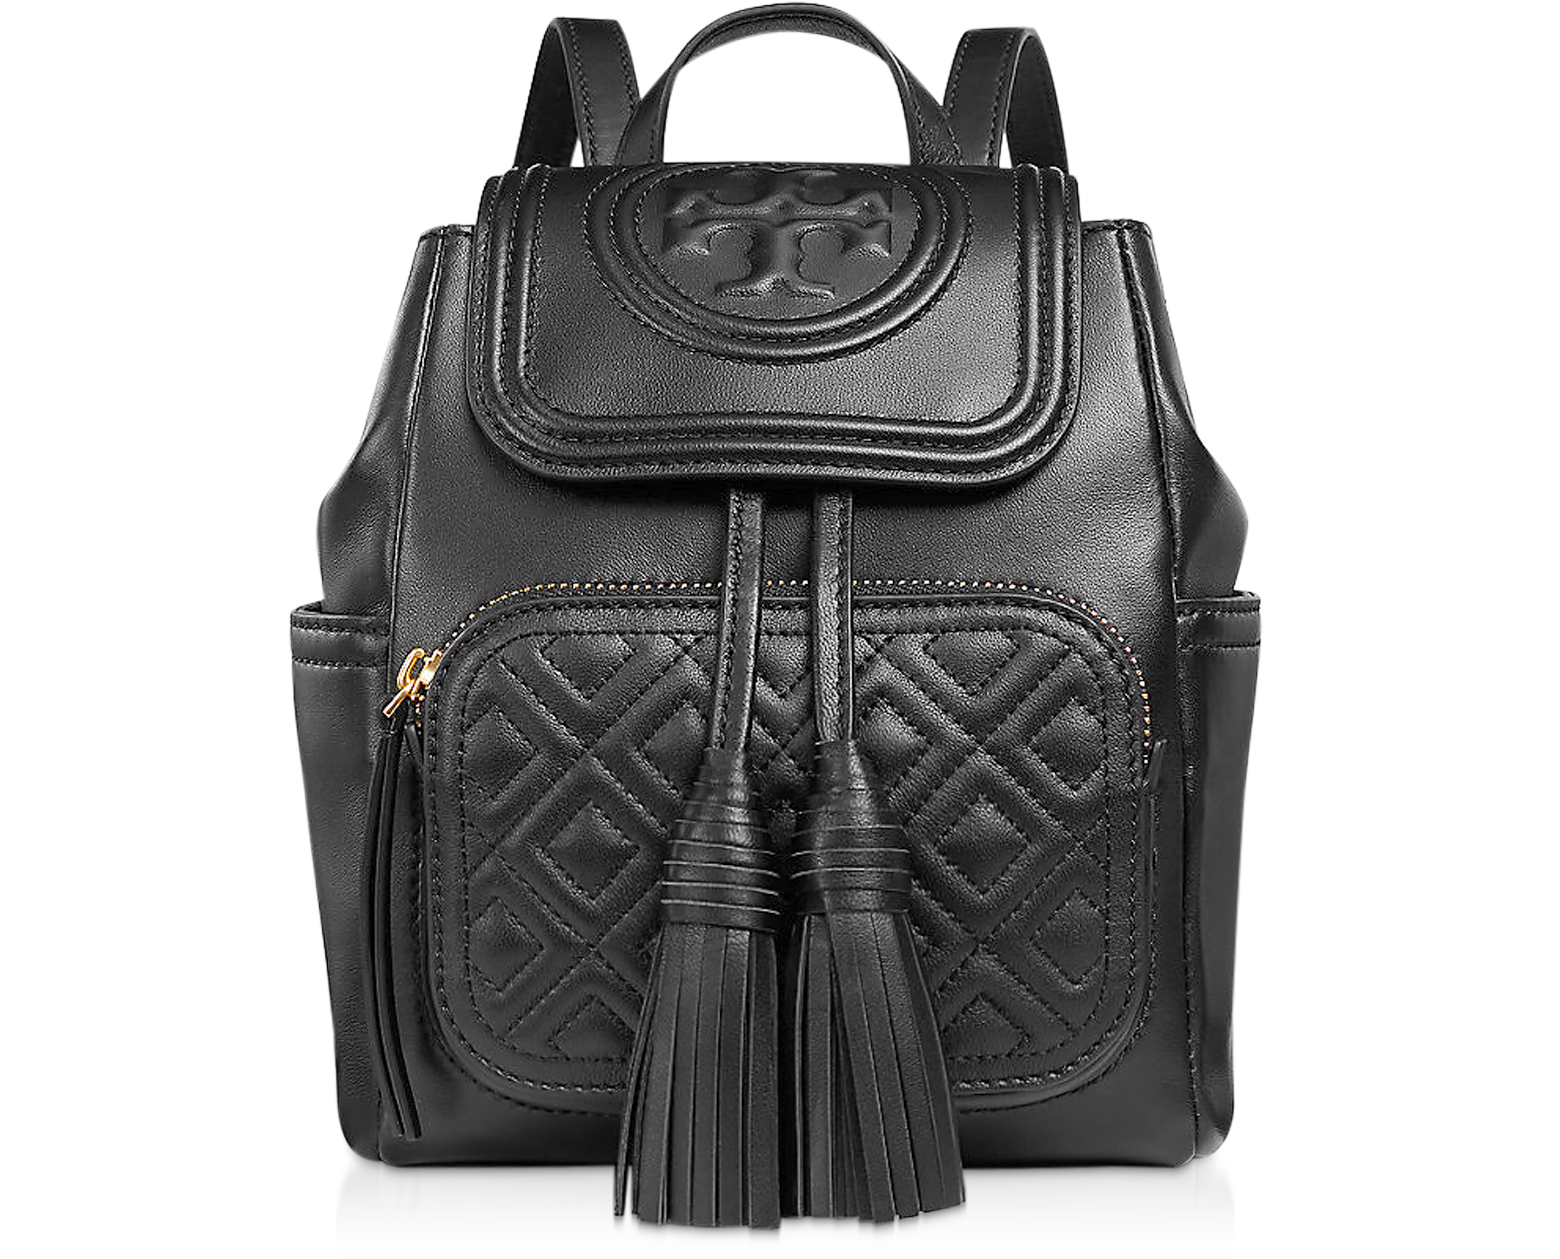 Buy Tory Burch Women's Fleming Soft Mini Backpack, Black, One Size at